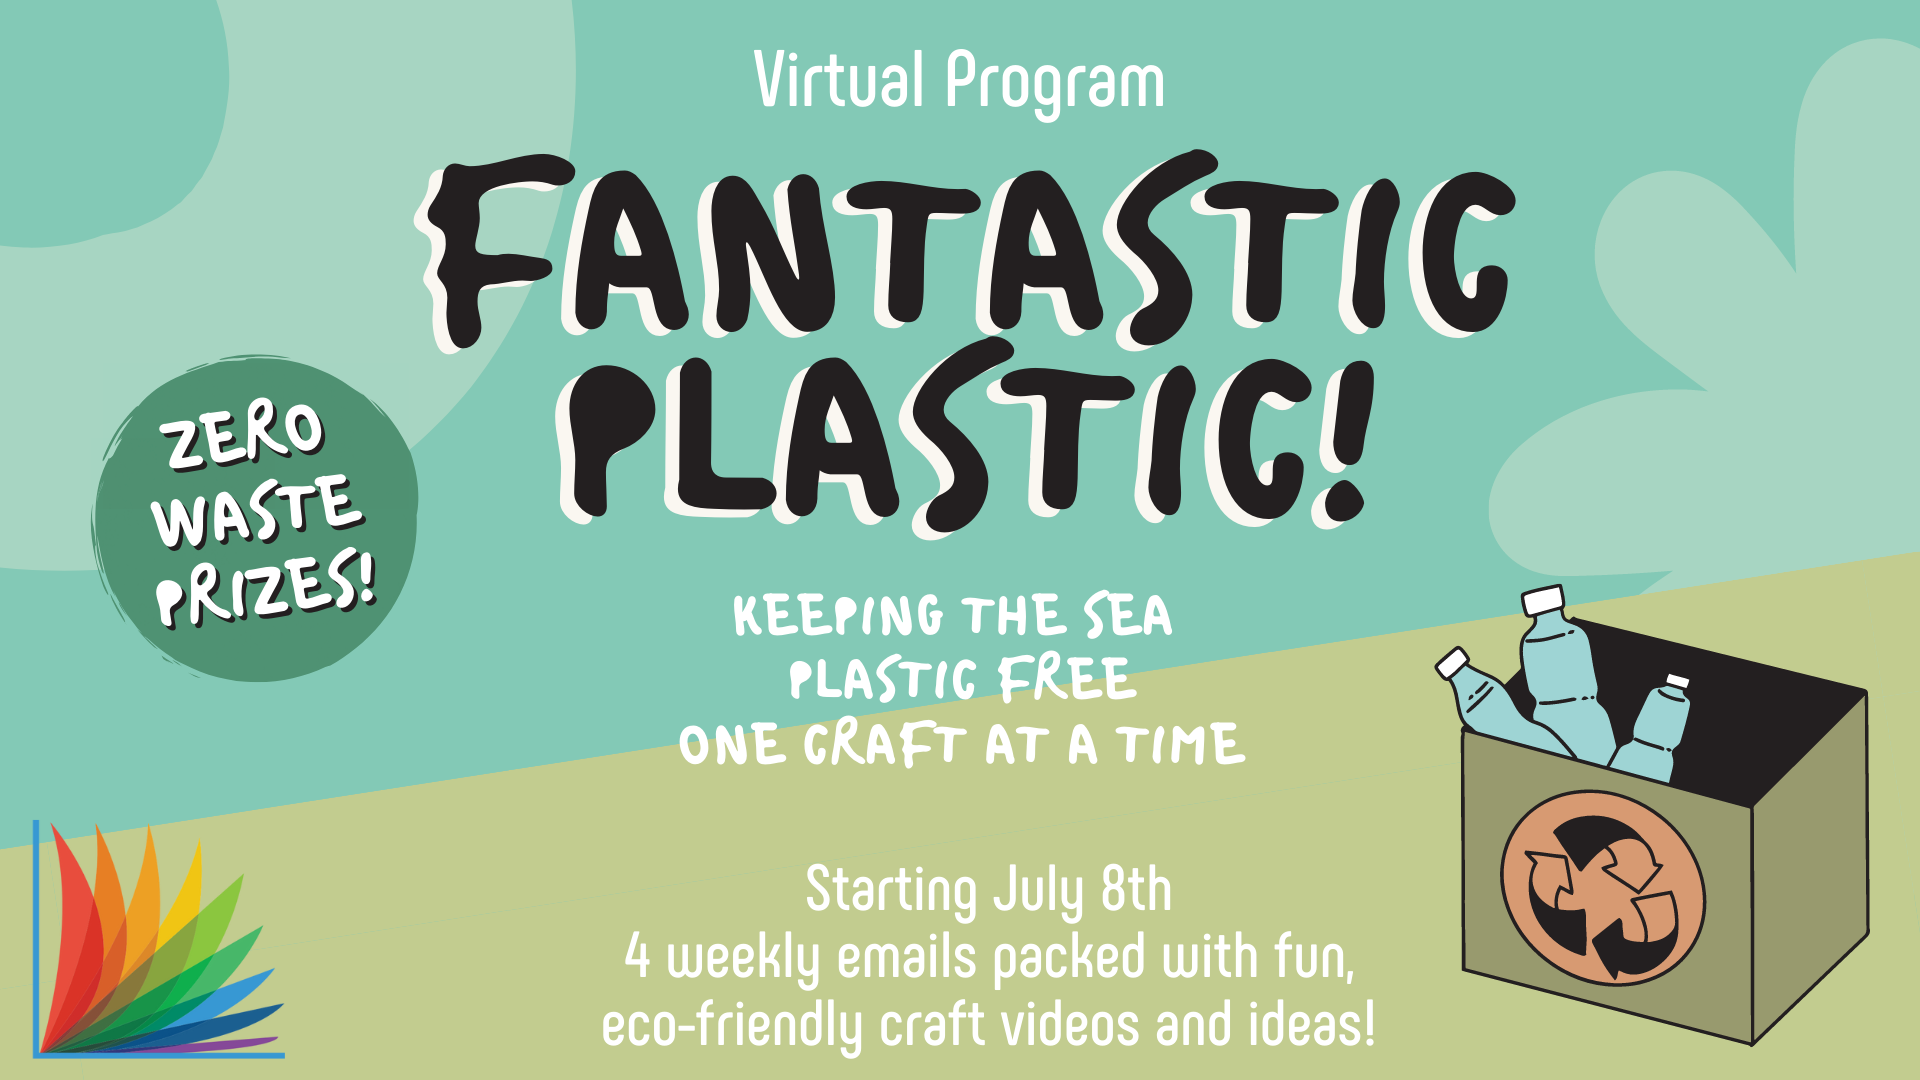 Virtual Program, Fantastic Plastic! Keeping the Sea Plastic Free One Craft at a Time, Starting July 8th 4 weekly emails packed with fun, eco-friendly craft videos and ideas, Zero Waste Prizes!